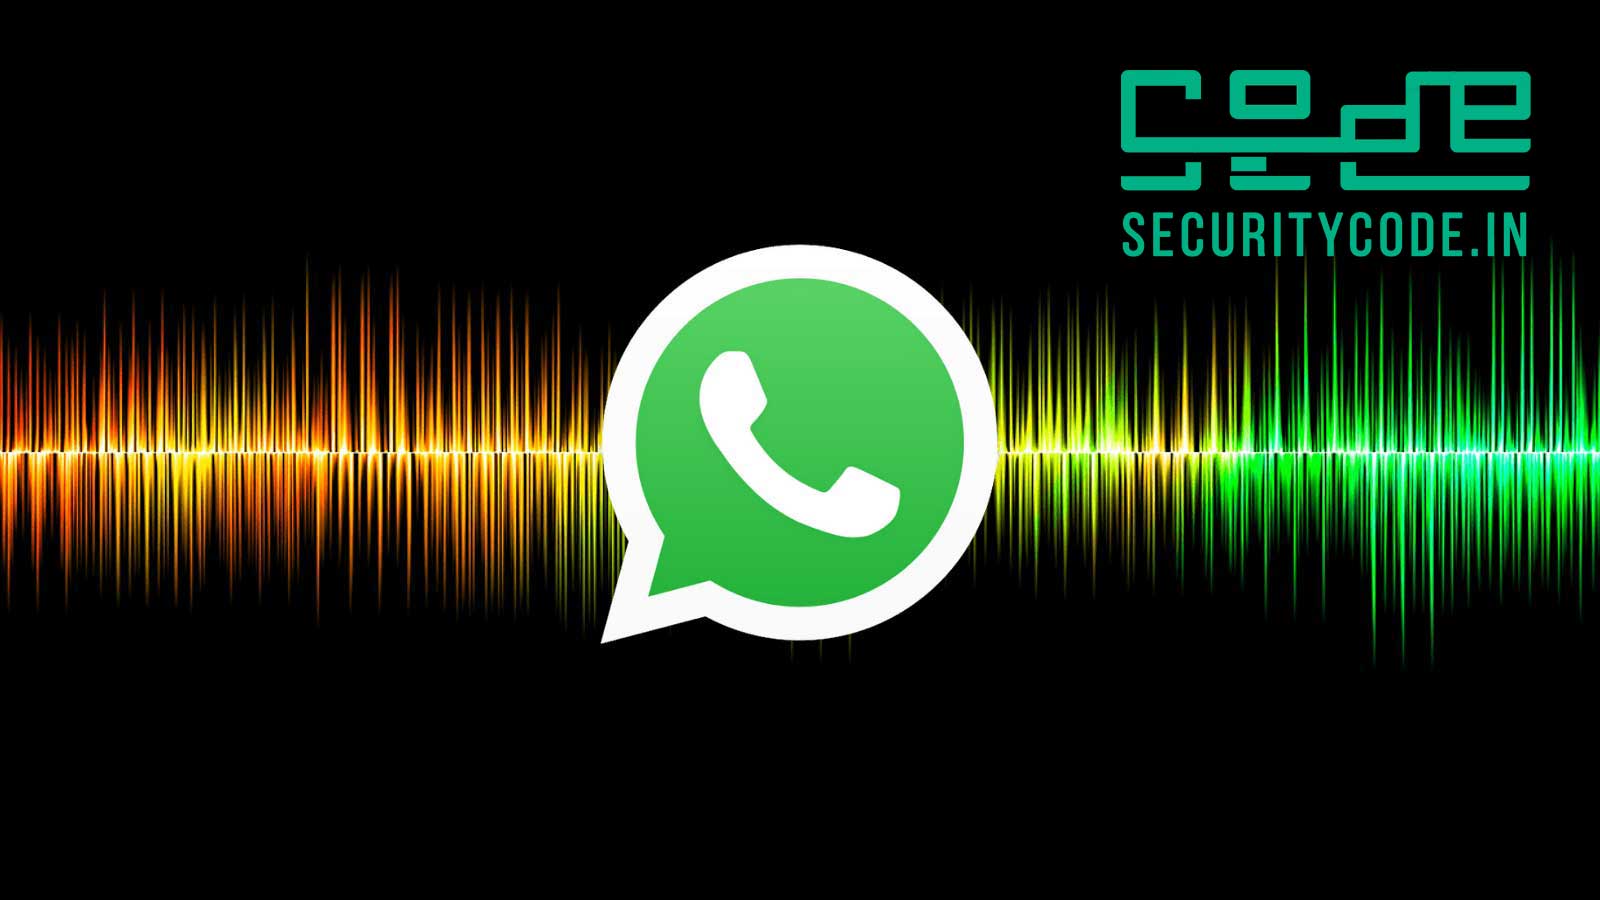 WhatsApp Begins Rolling Out ‘View Once’ Voice Messages